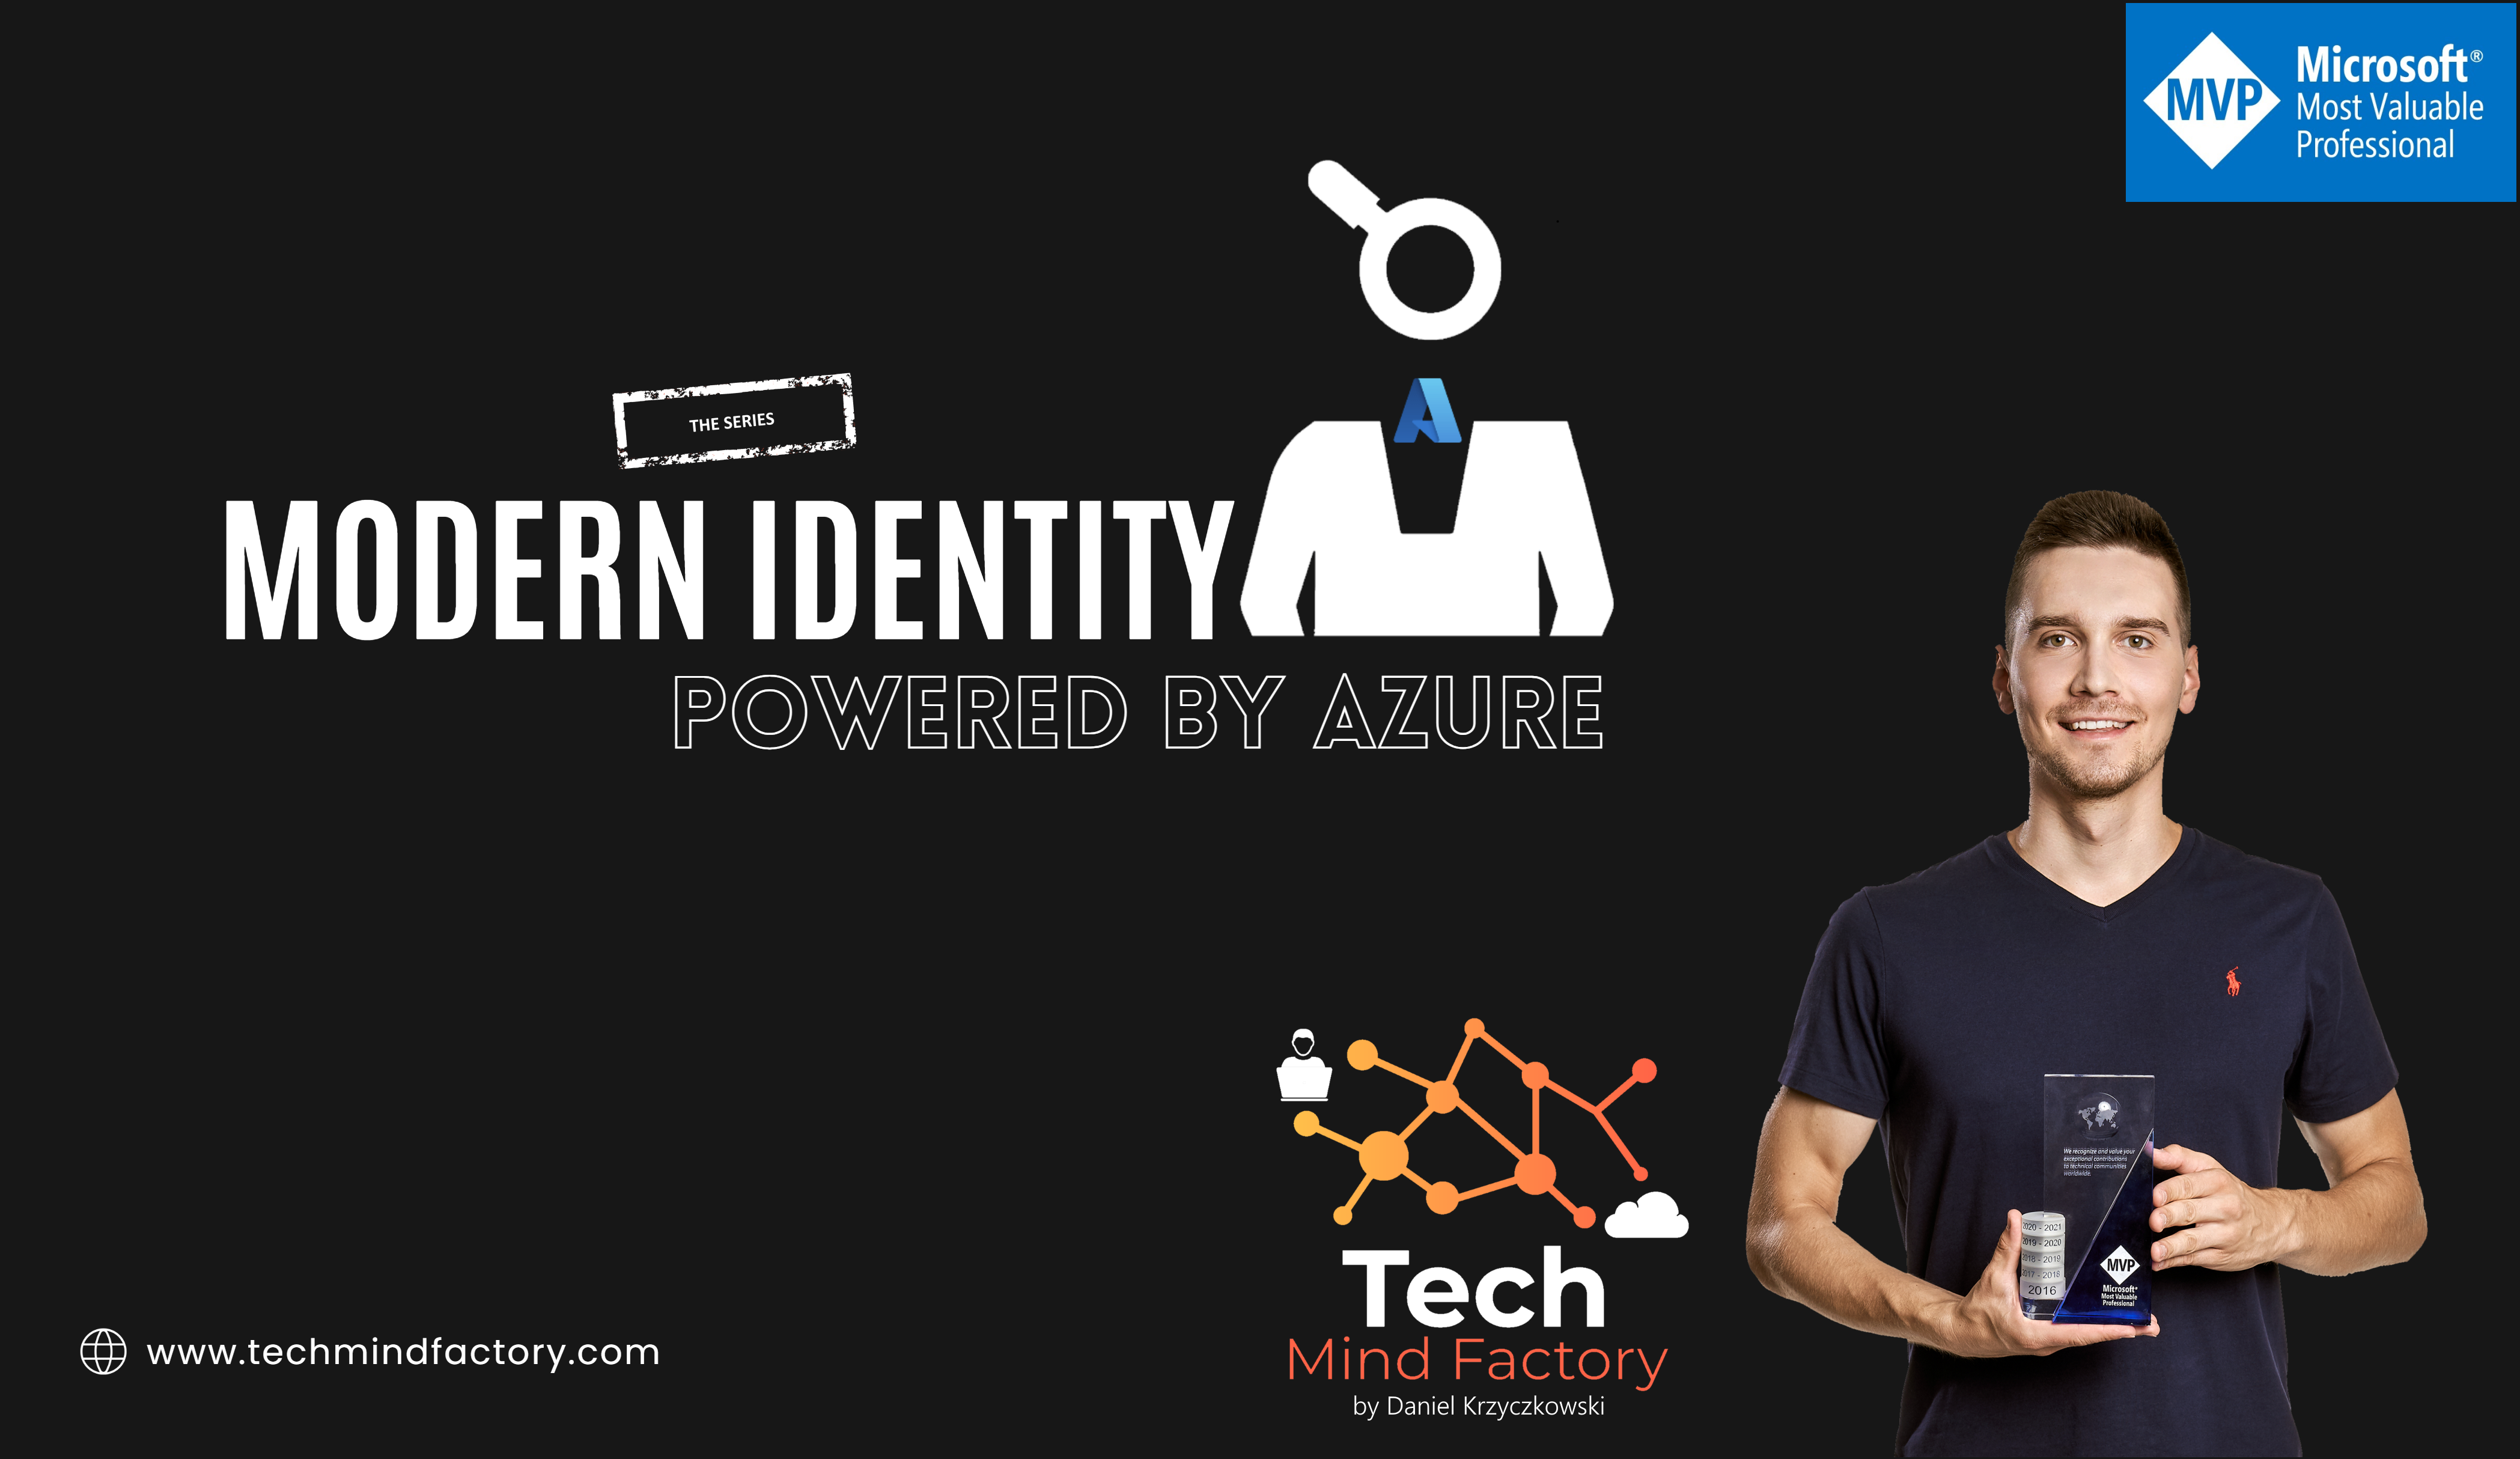 Modern Indentity powered by Azure